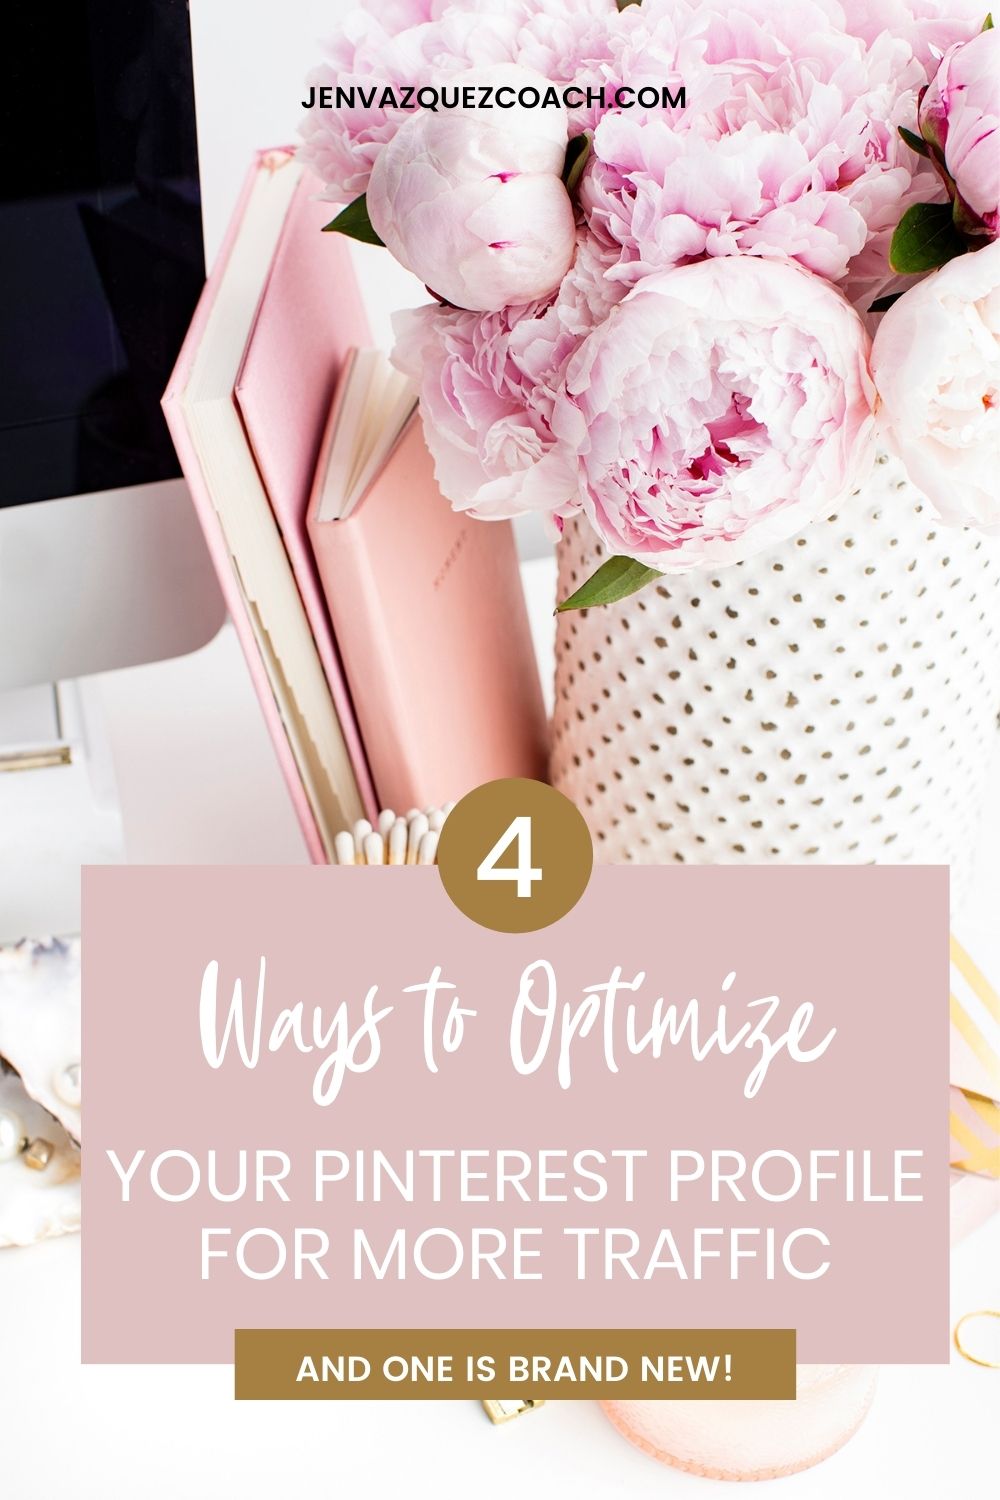 4 Ways to Optimize Your Pinterest Profile for More Traffic (and one is NEW!)